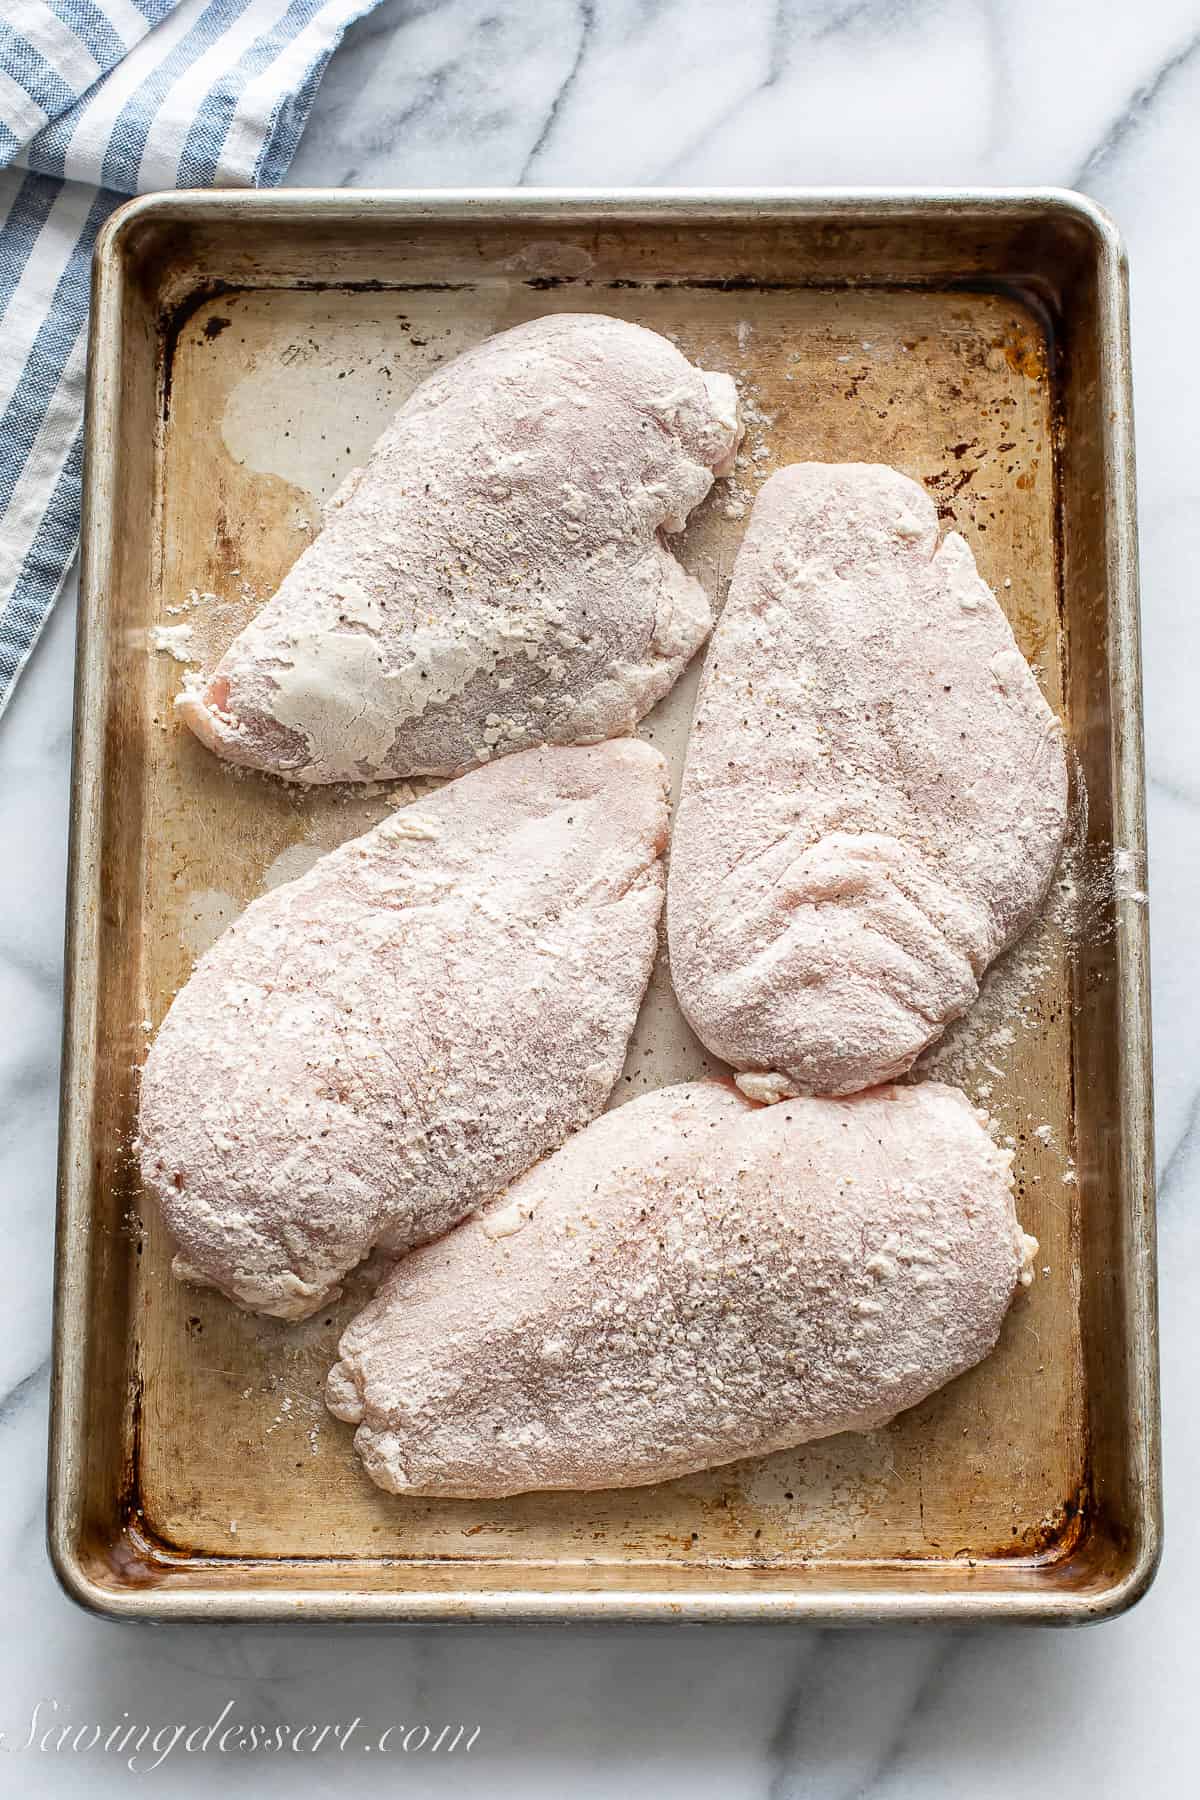 uncooked chicken breasts coated in flour on a baking tray